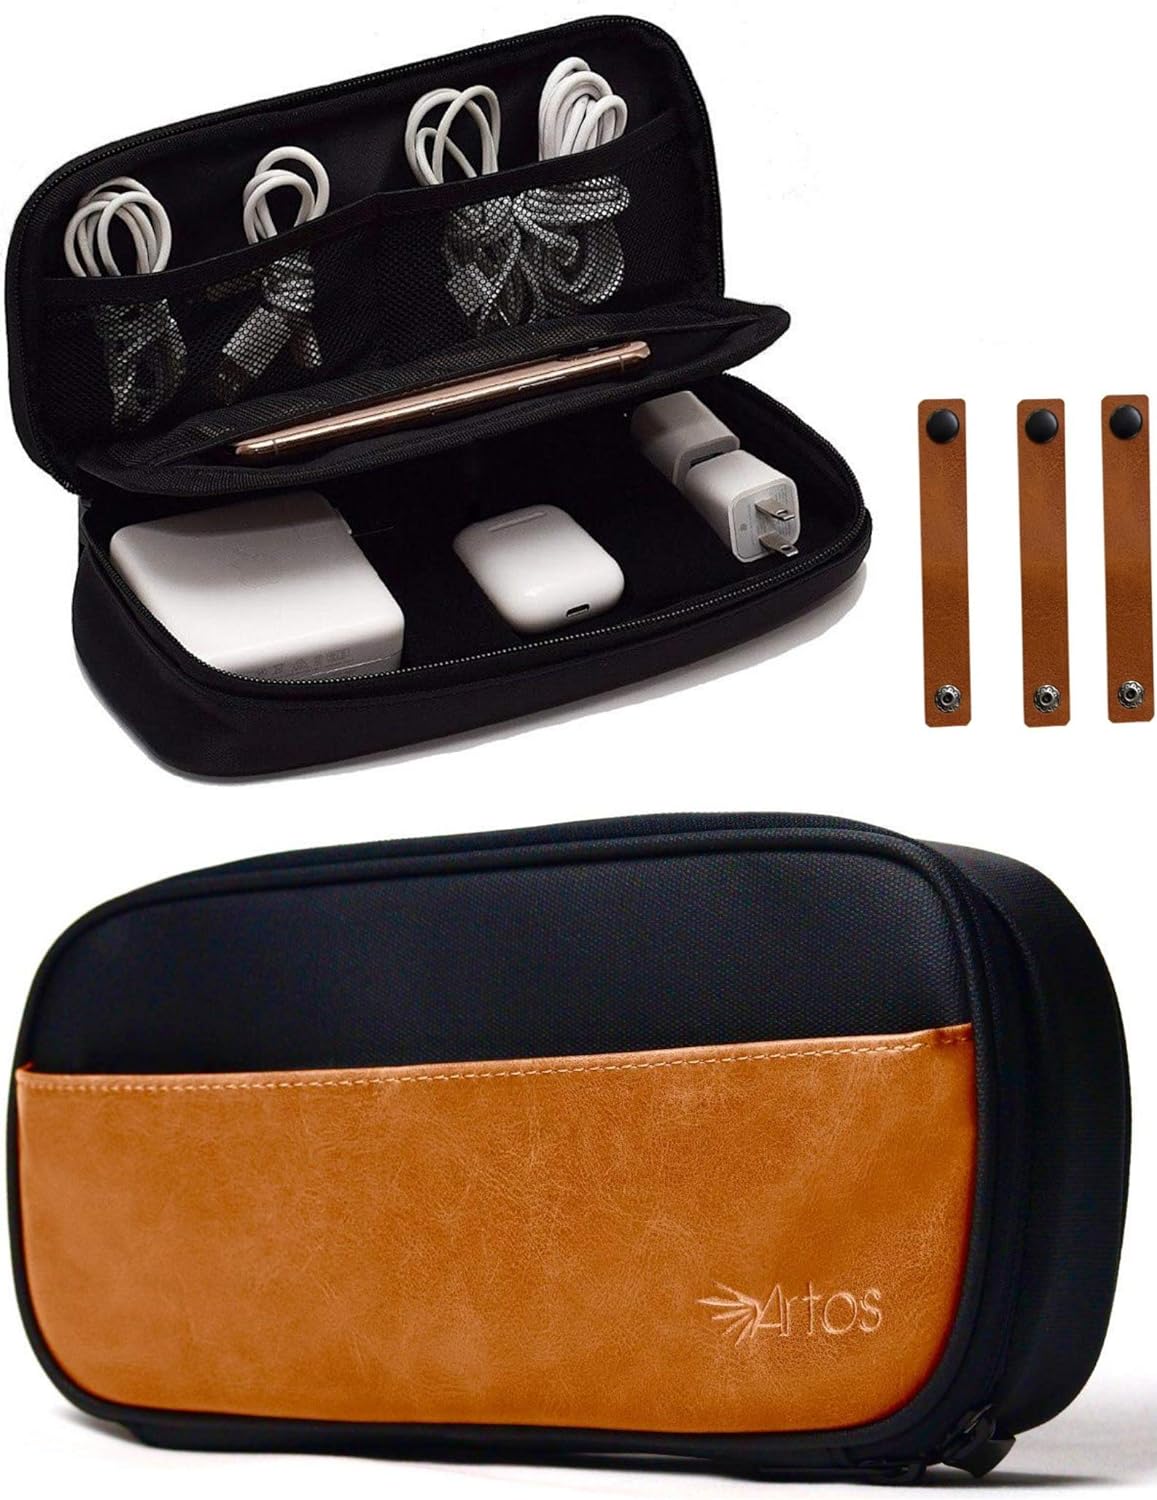 Leather Electronic Organizer Travel Case | Cable Organizer | Cable Storage | Cable Bag | Tech Pouch | Charger Cord Organizer | Travel Essentials | Travel Work Essentials | Travel Organization